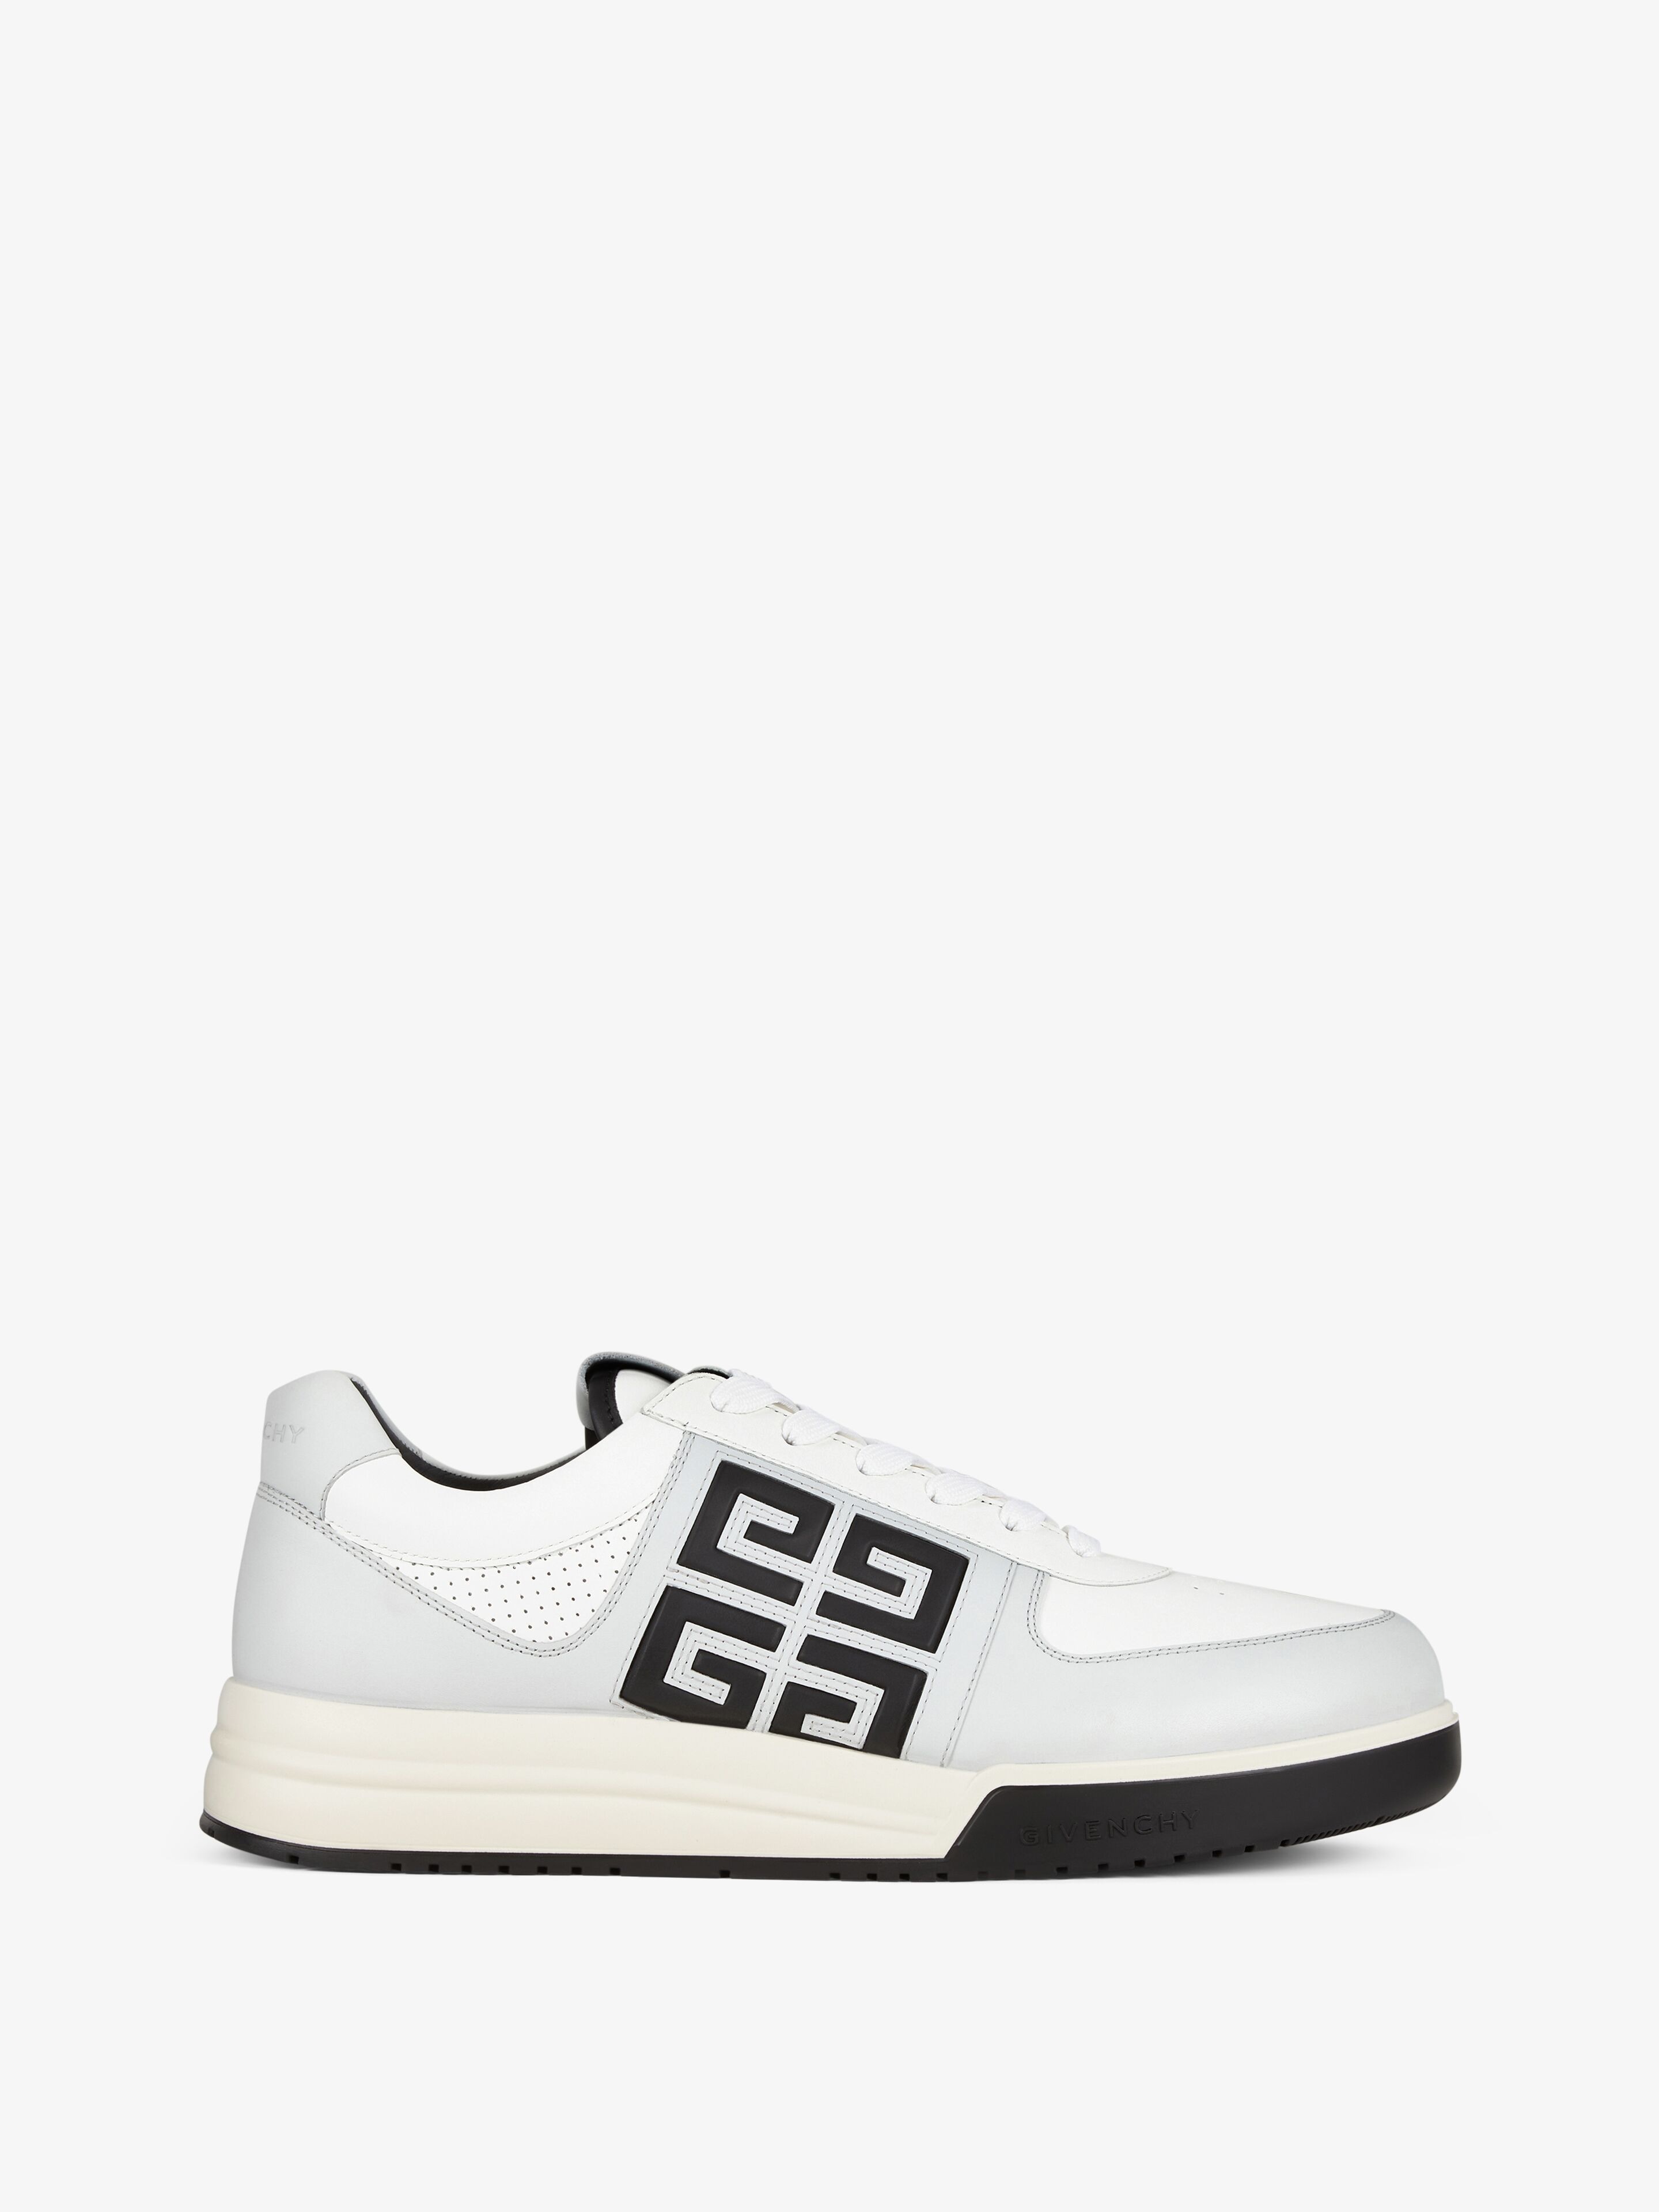 Givenchy GV1 low-top sneakers - White